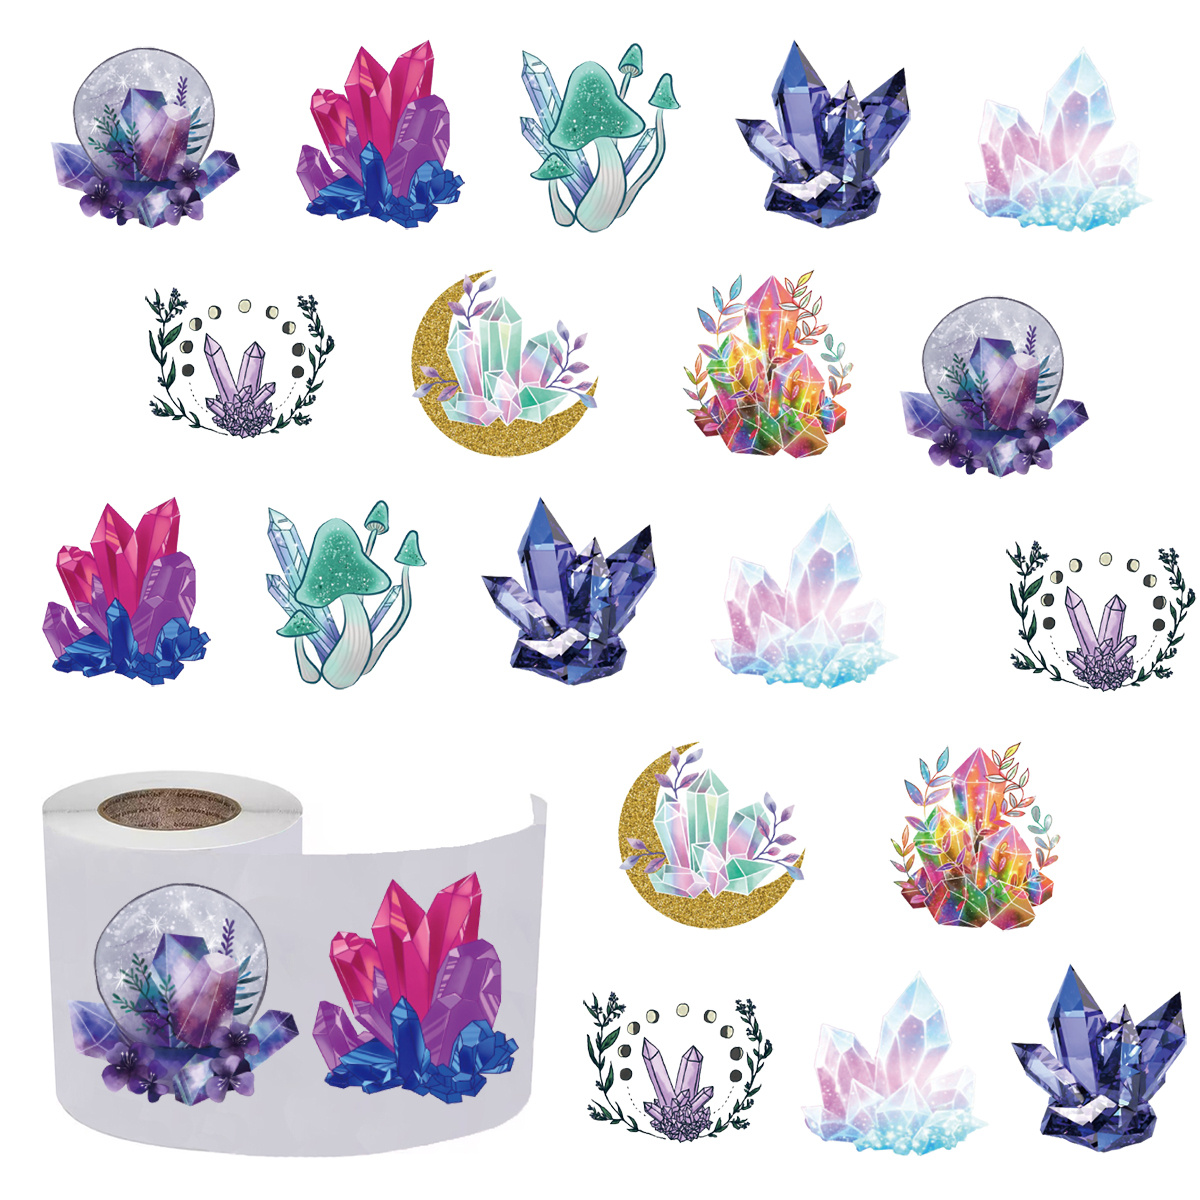 10/50PCS Crystal Stickers Waterproof Decals for Water Bottles